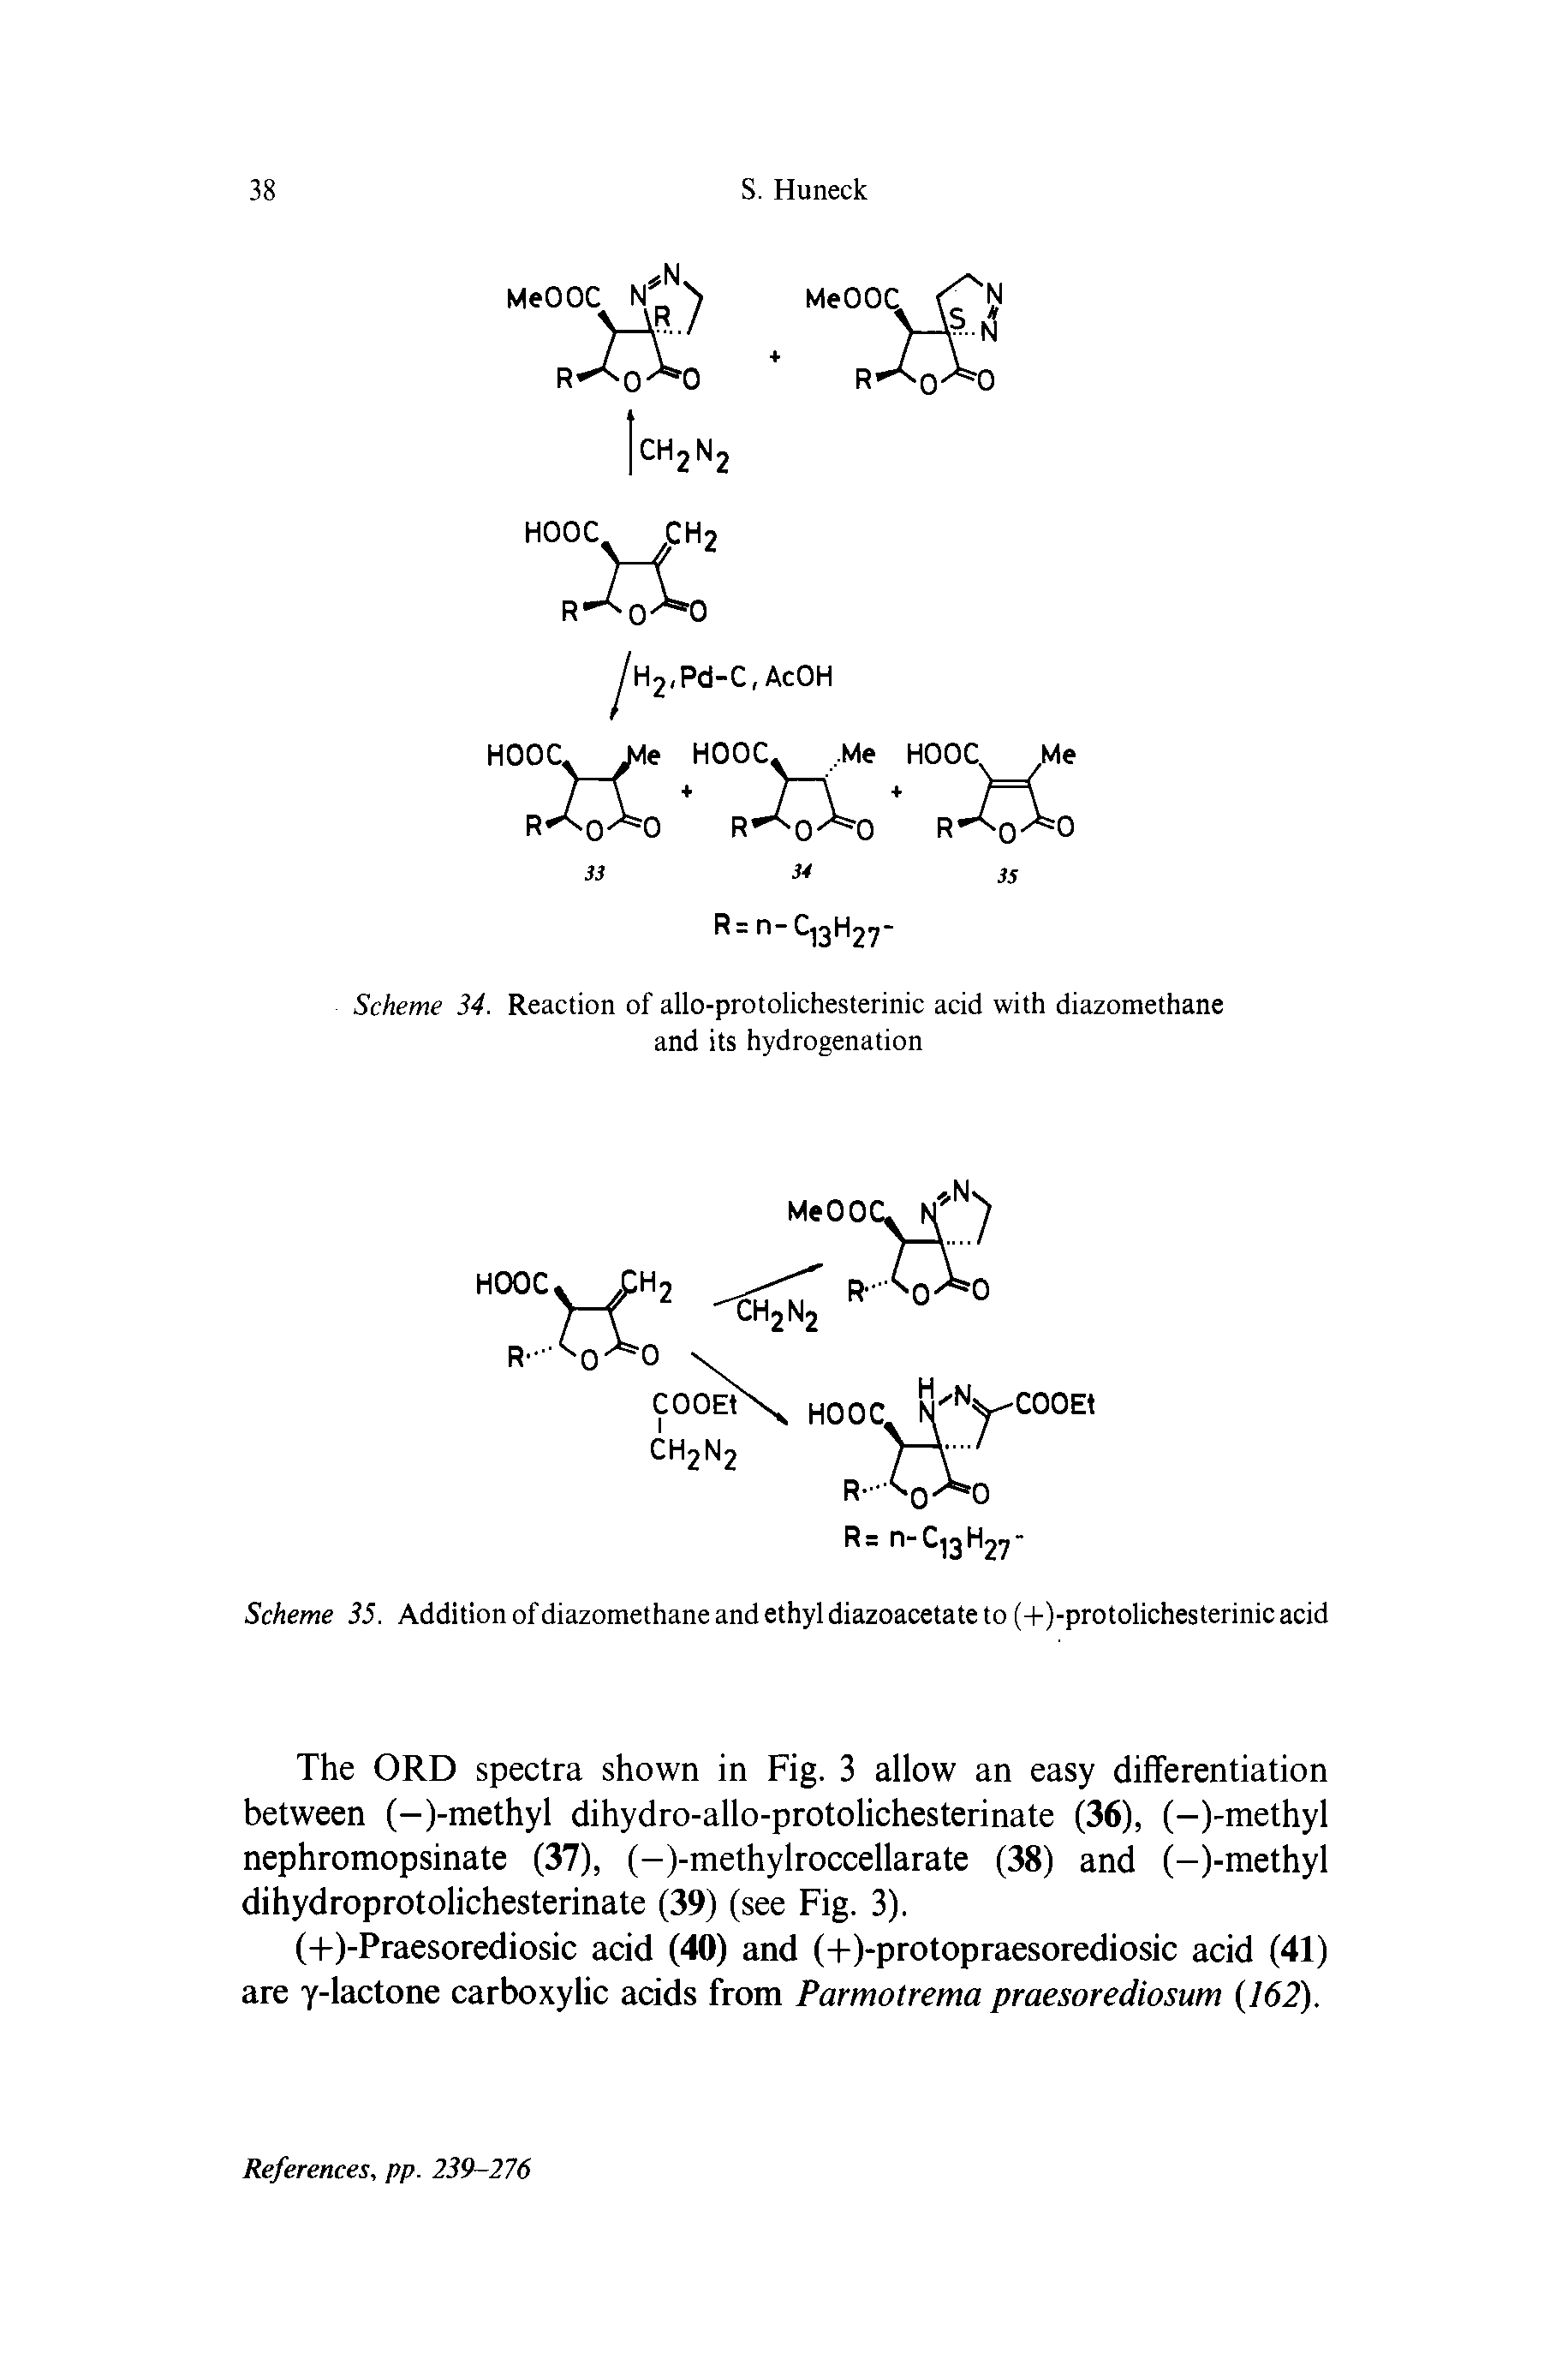 Scheme 34. Reaction of allo-protolichesterinic acid with diazomethane and its hydrogenation...